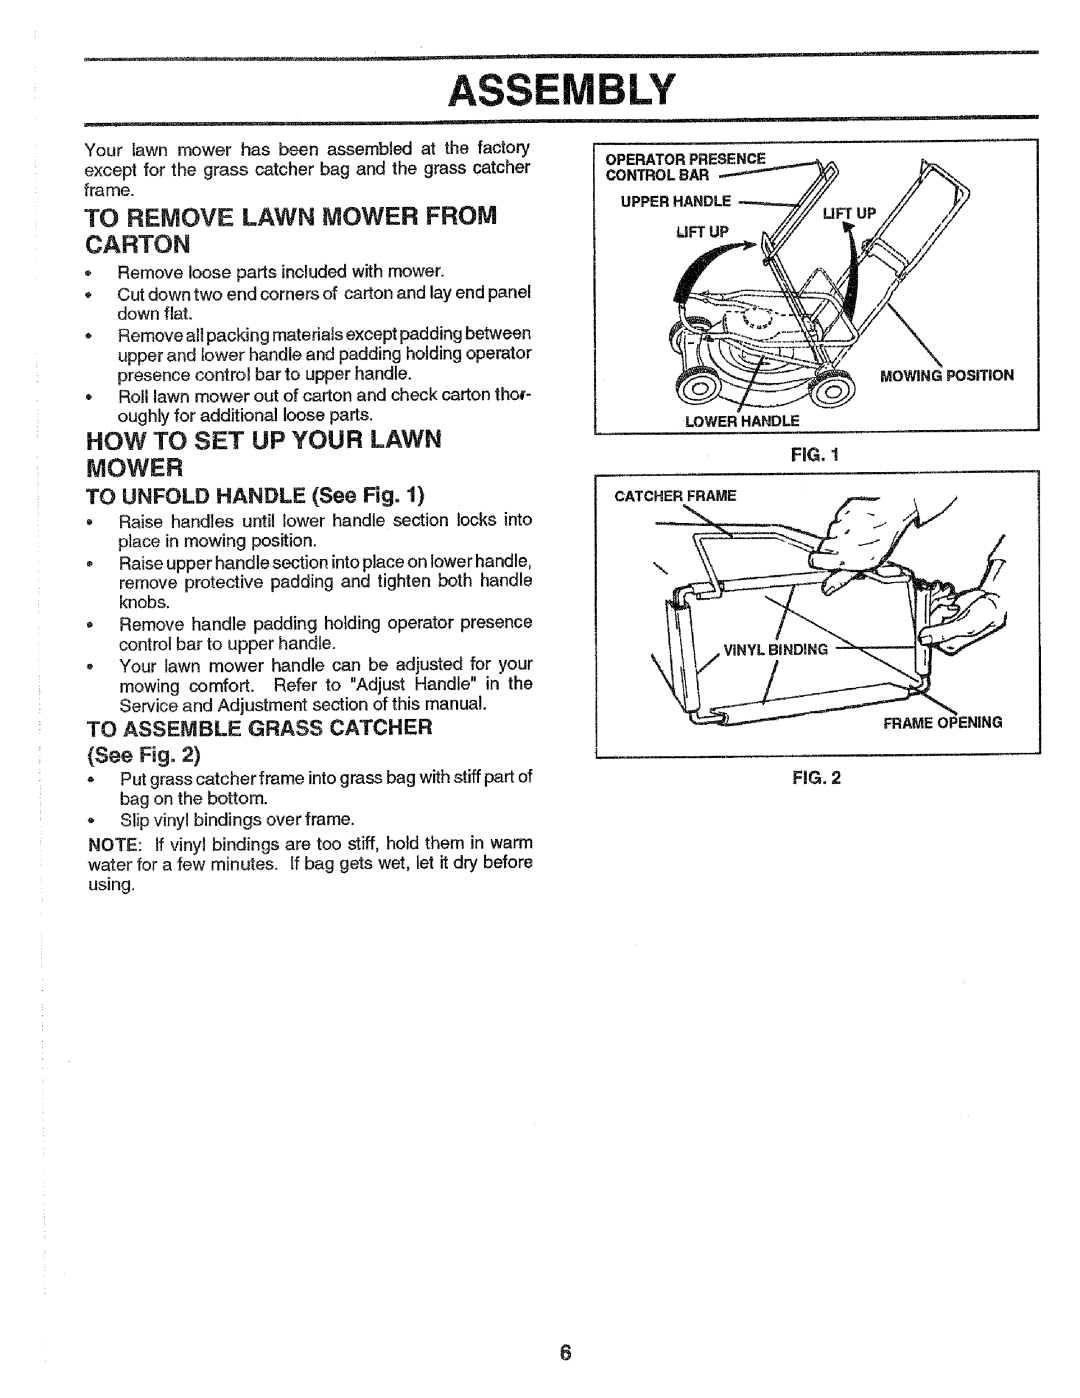 Craftsman 917.37248 owner manual To Remove Lawn Mower From Carton, How To Set Up Your Lawn, TO UNFOLD HANDLE See Fig 